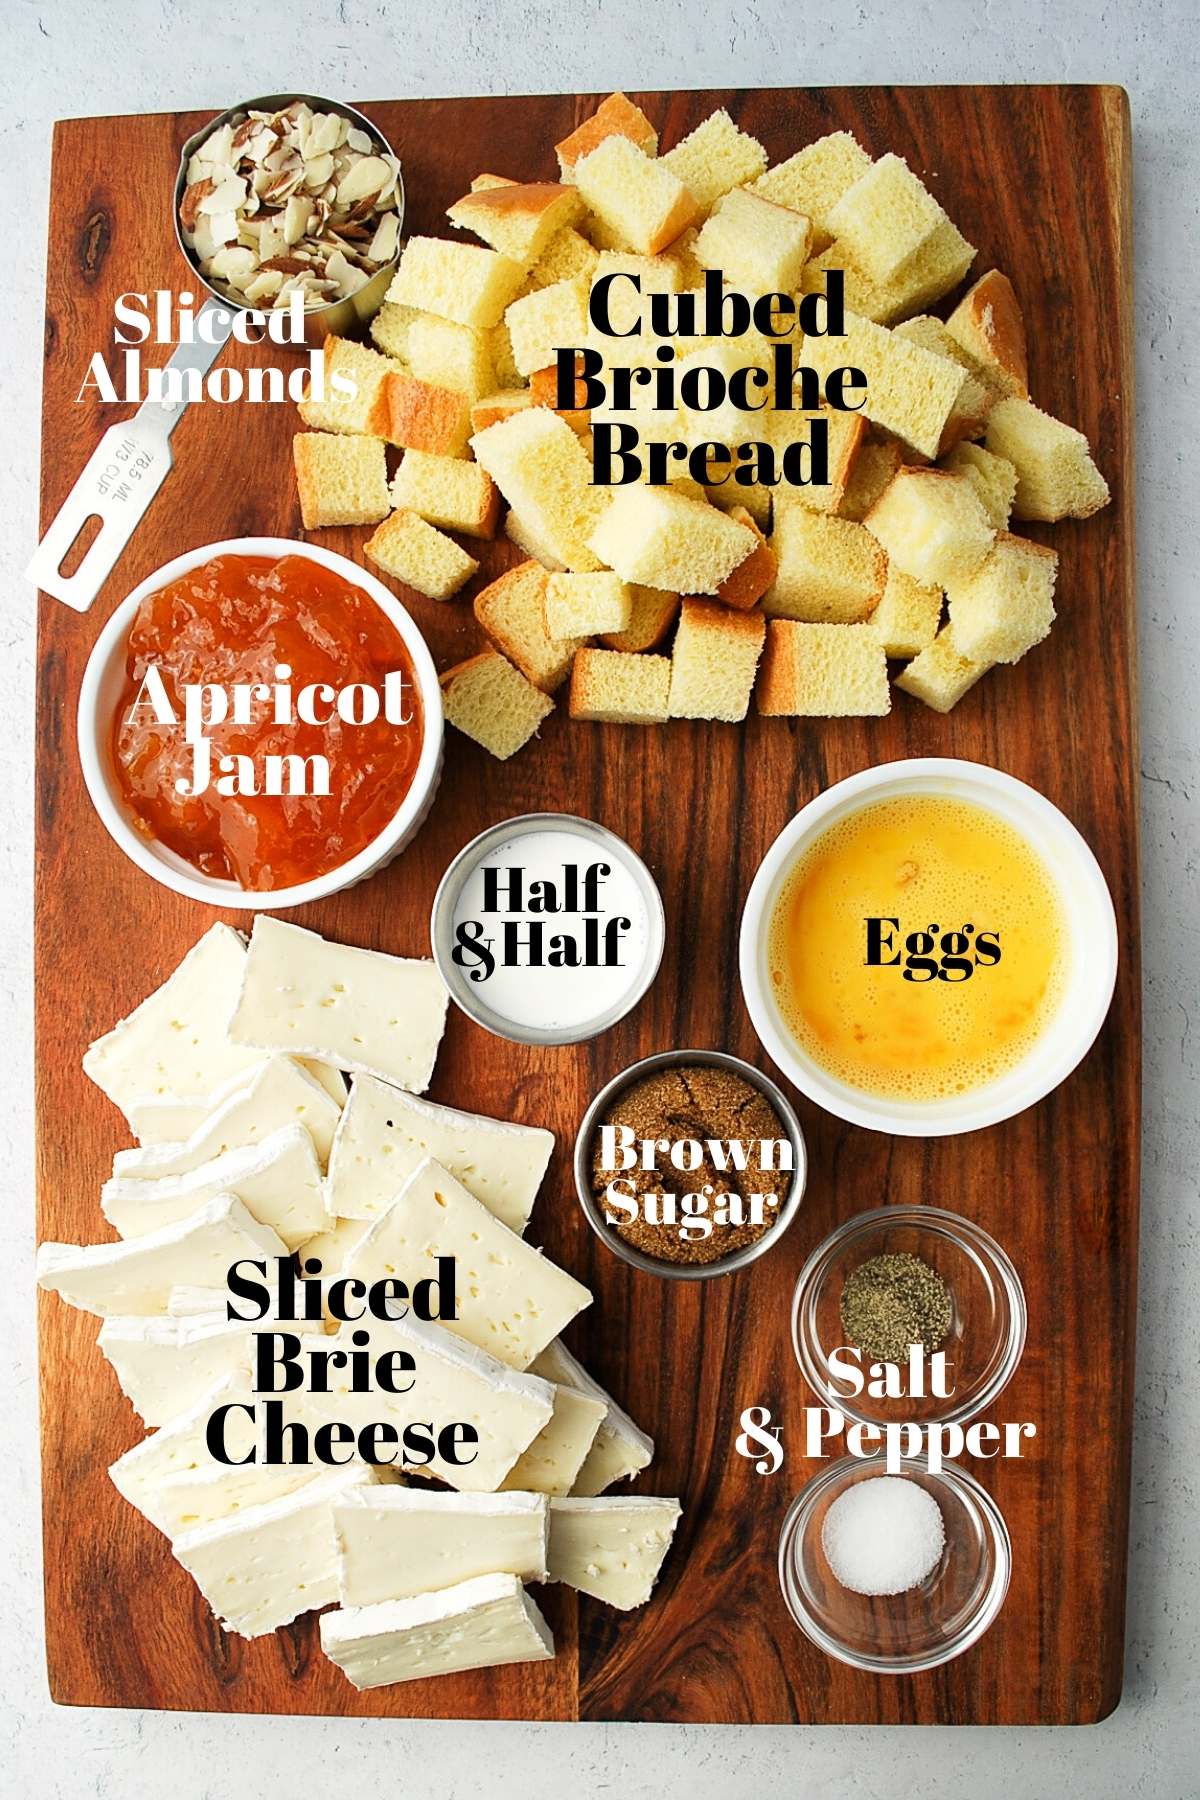 all of the ingredients for brown sugar baked brie displayed on a cutting board